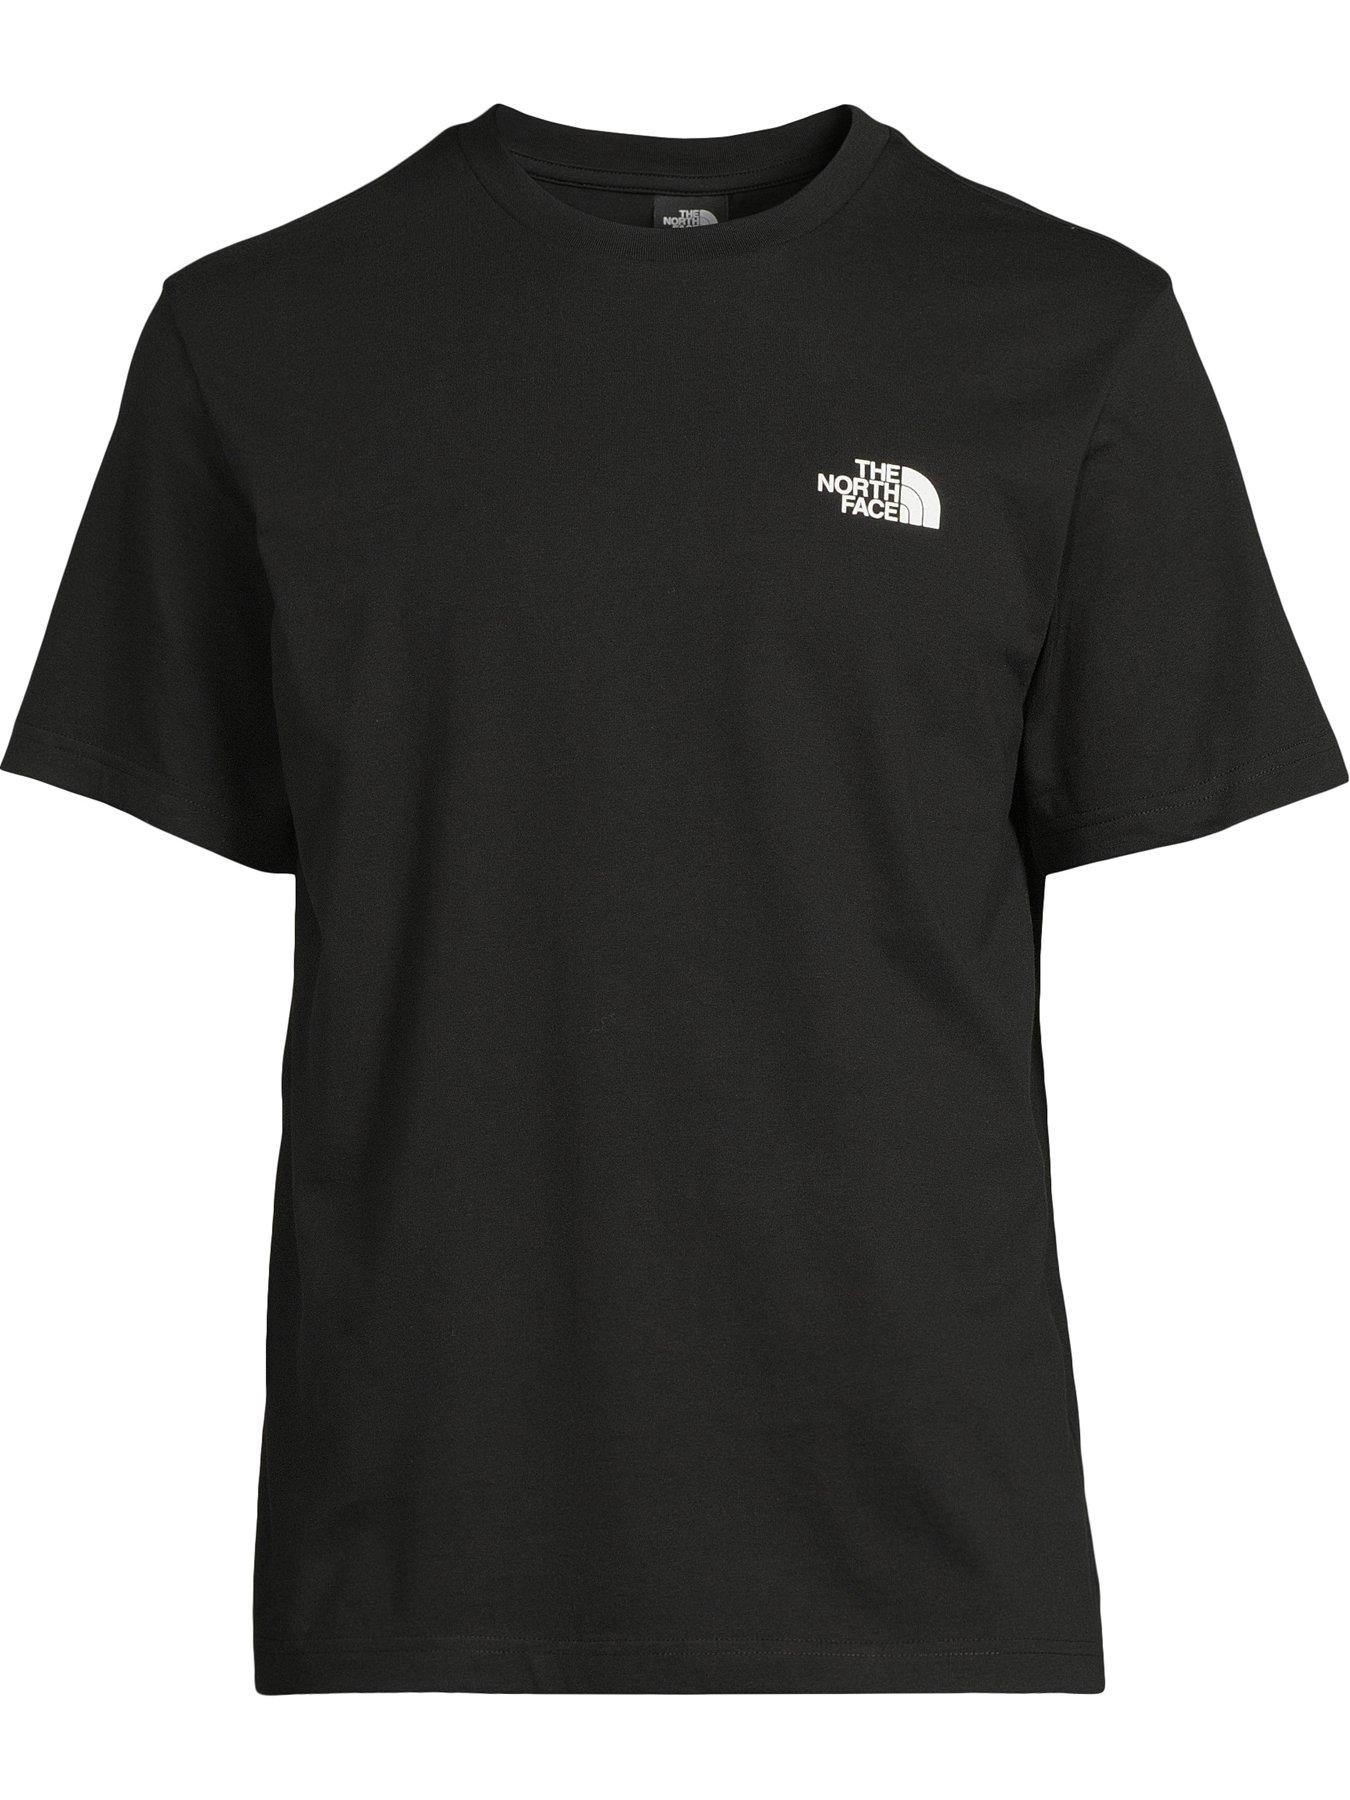 THE NORTH FACE Men's Short Sleeve Simple Dome Tee - Black | Very.co.uk